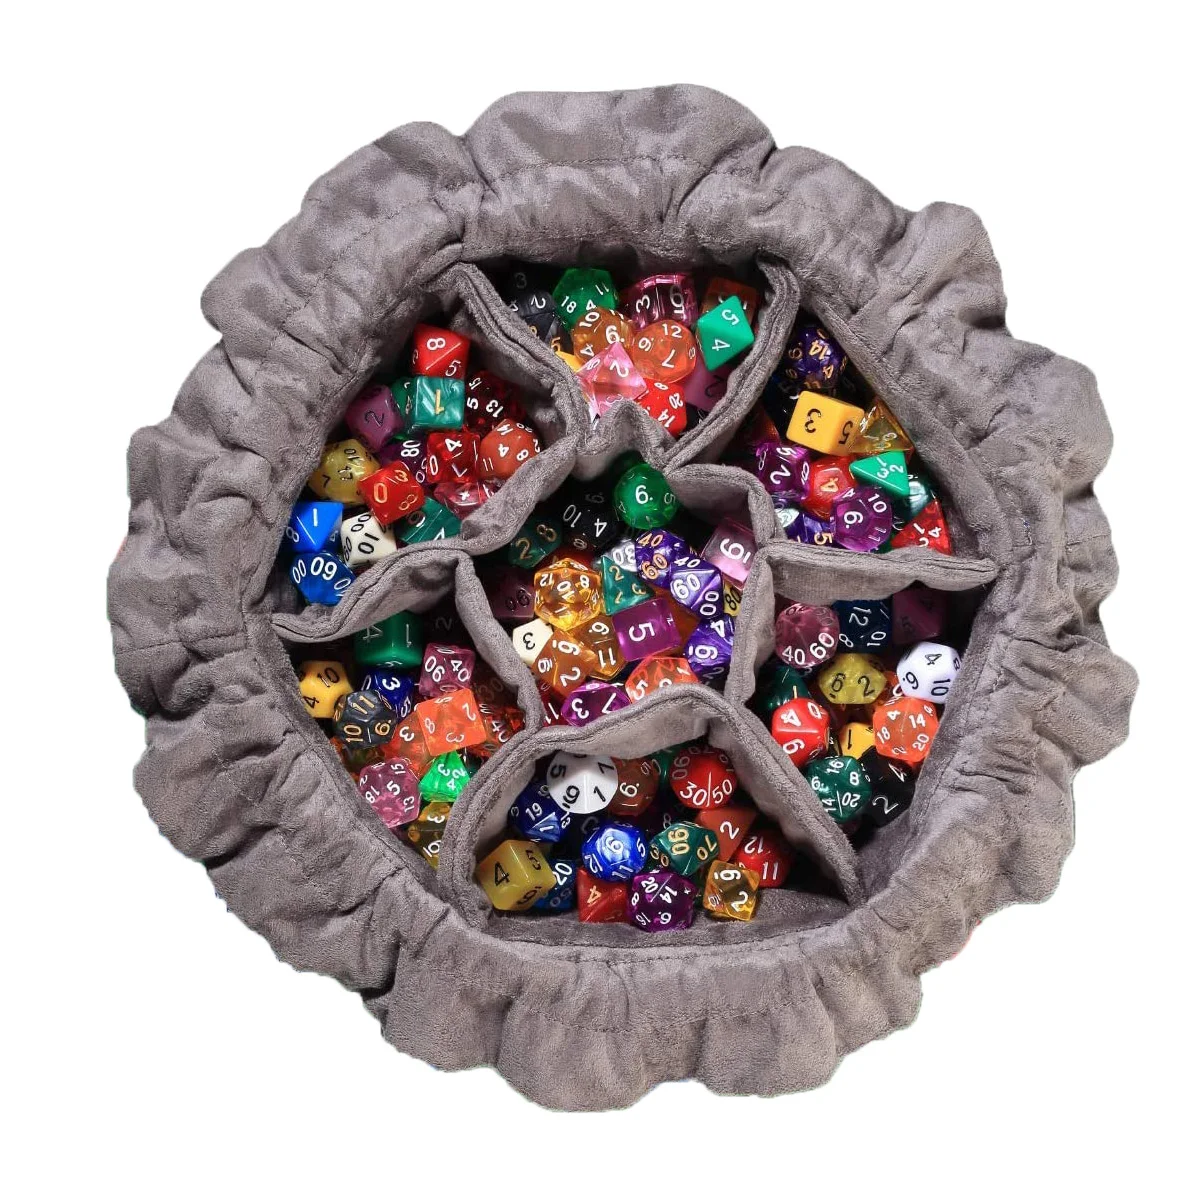 Perfect for Bulk Dice Dice Storage Bag with 6 Pockets Forged Dice Co Holds Over 1,000 Polyhedral Dice Pouch of The Endless Hoard Dice Bag